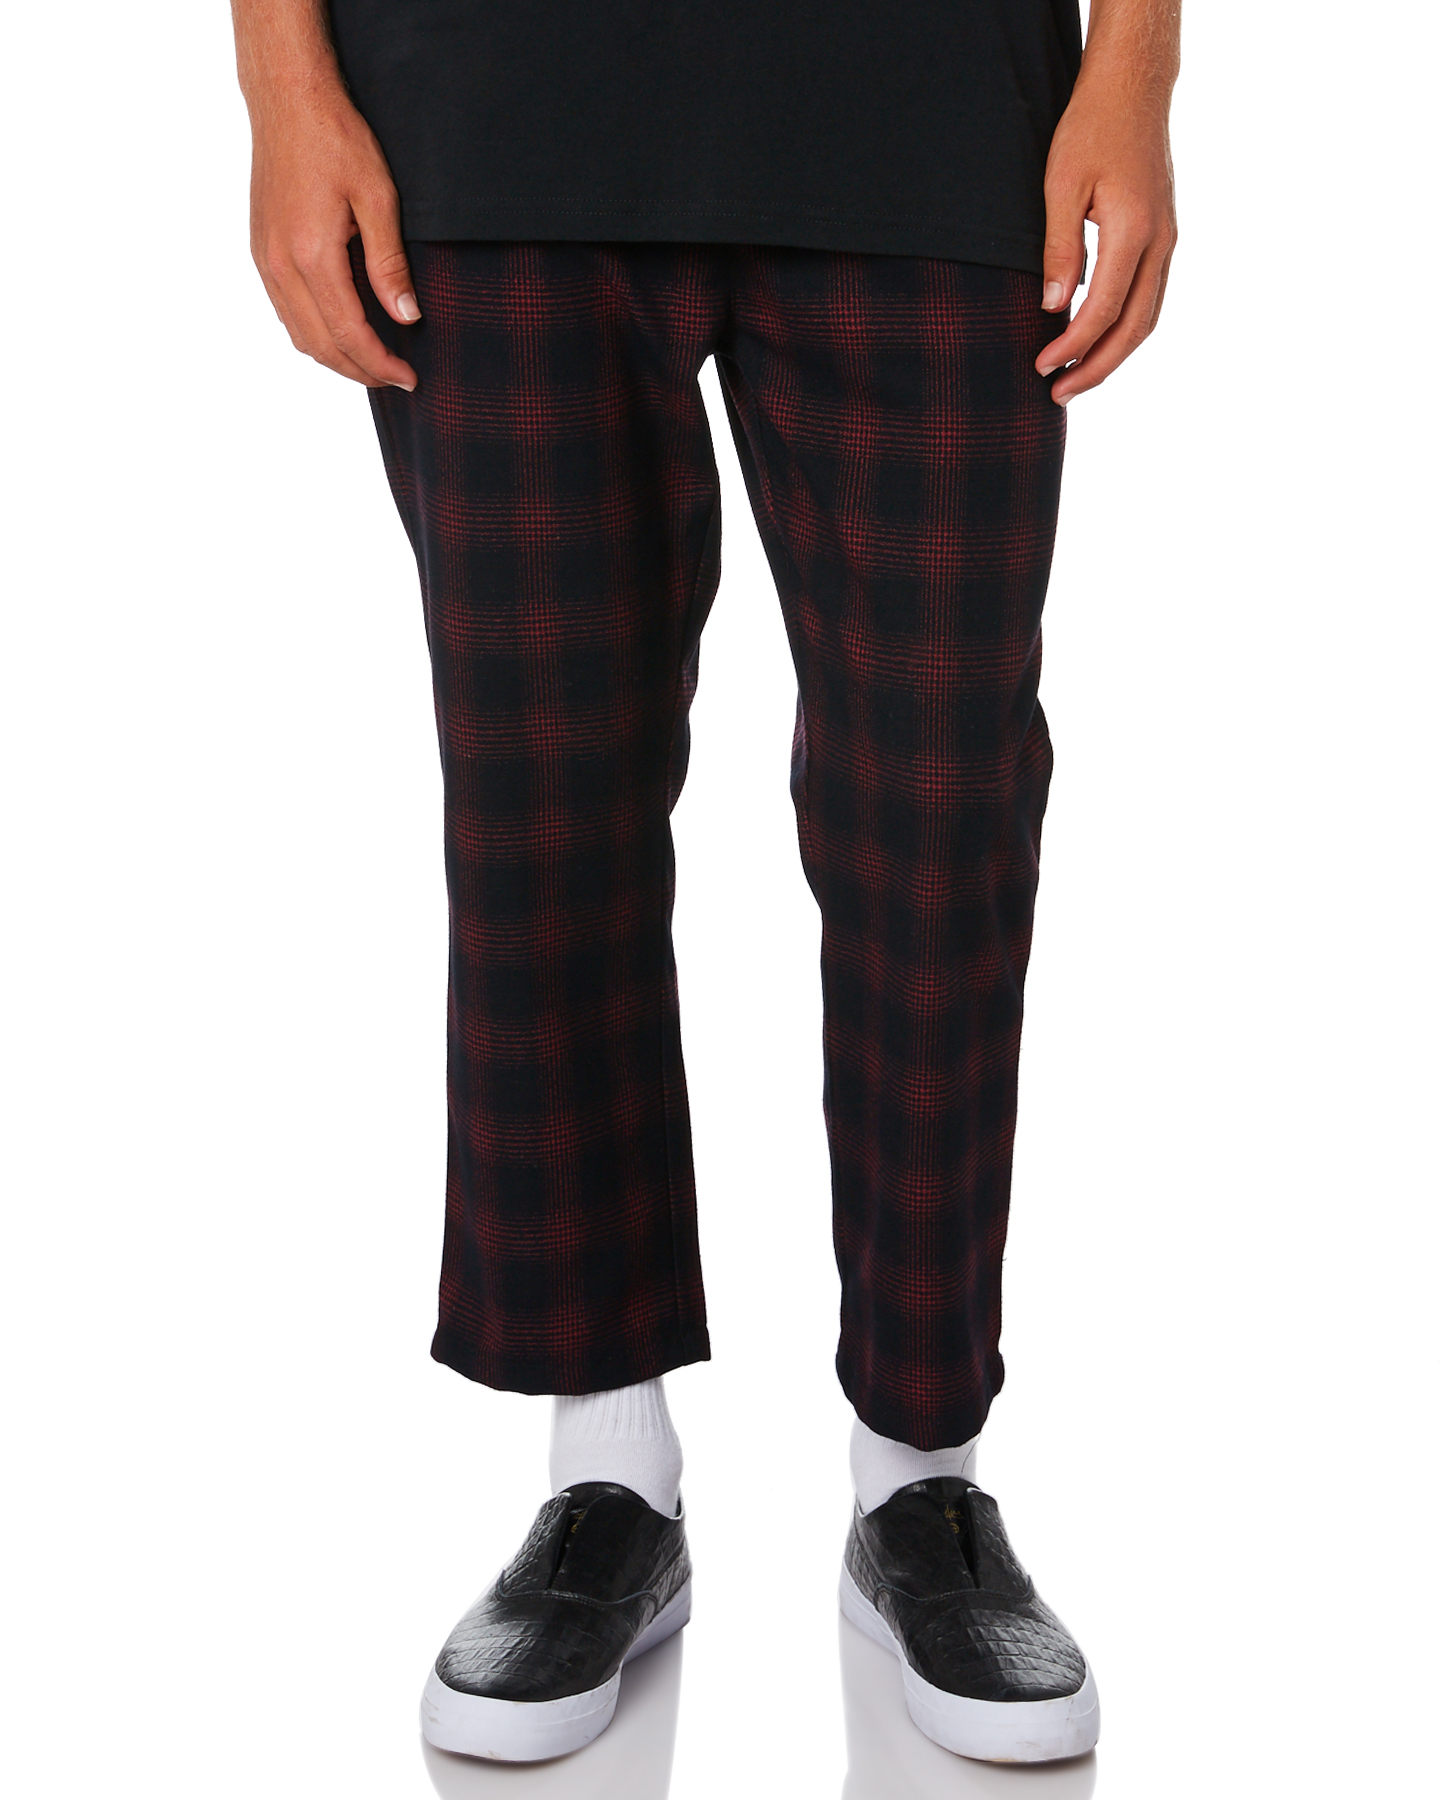 Stussy Ethan Check Street Mens Pant - Red Black | SurfStitch